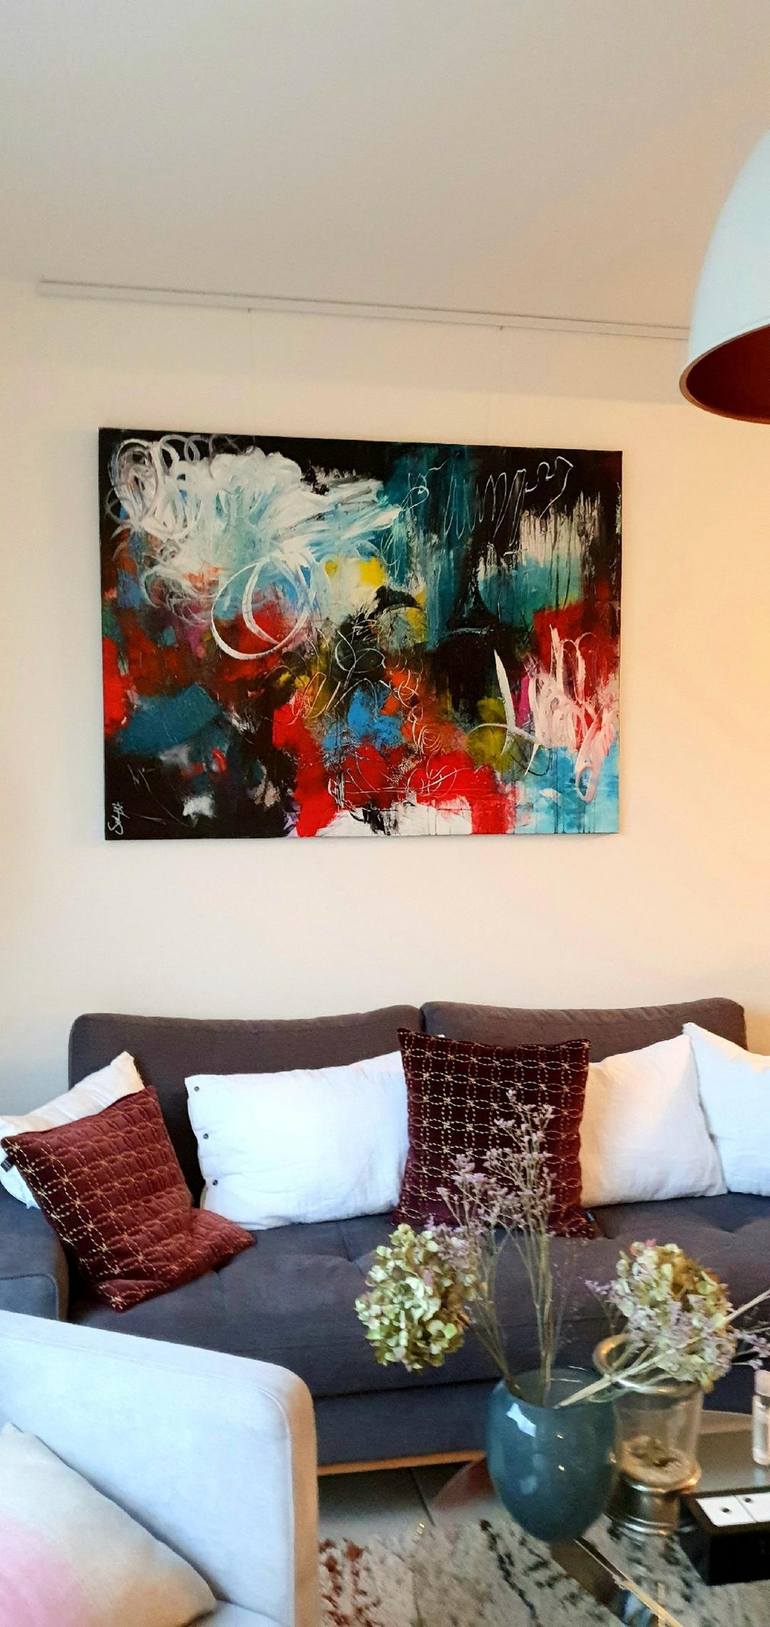 Original Abstract Expressionism Abstract Painting by Suely Blot